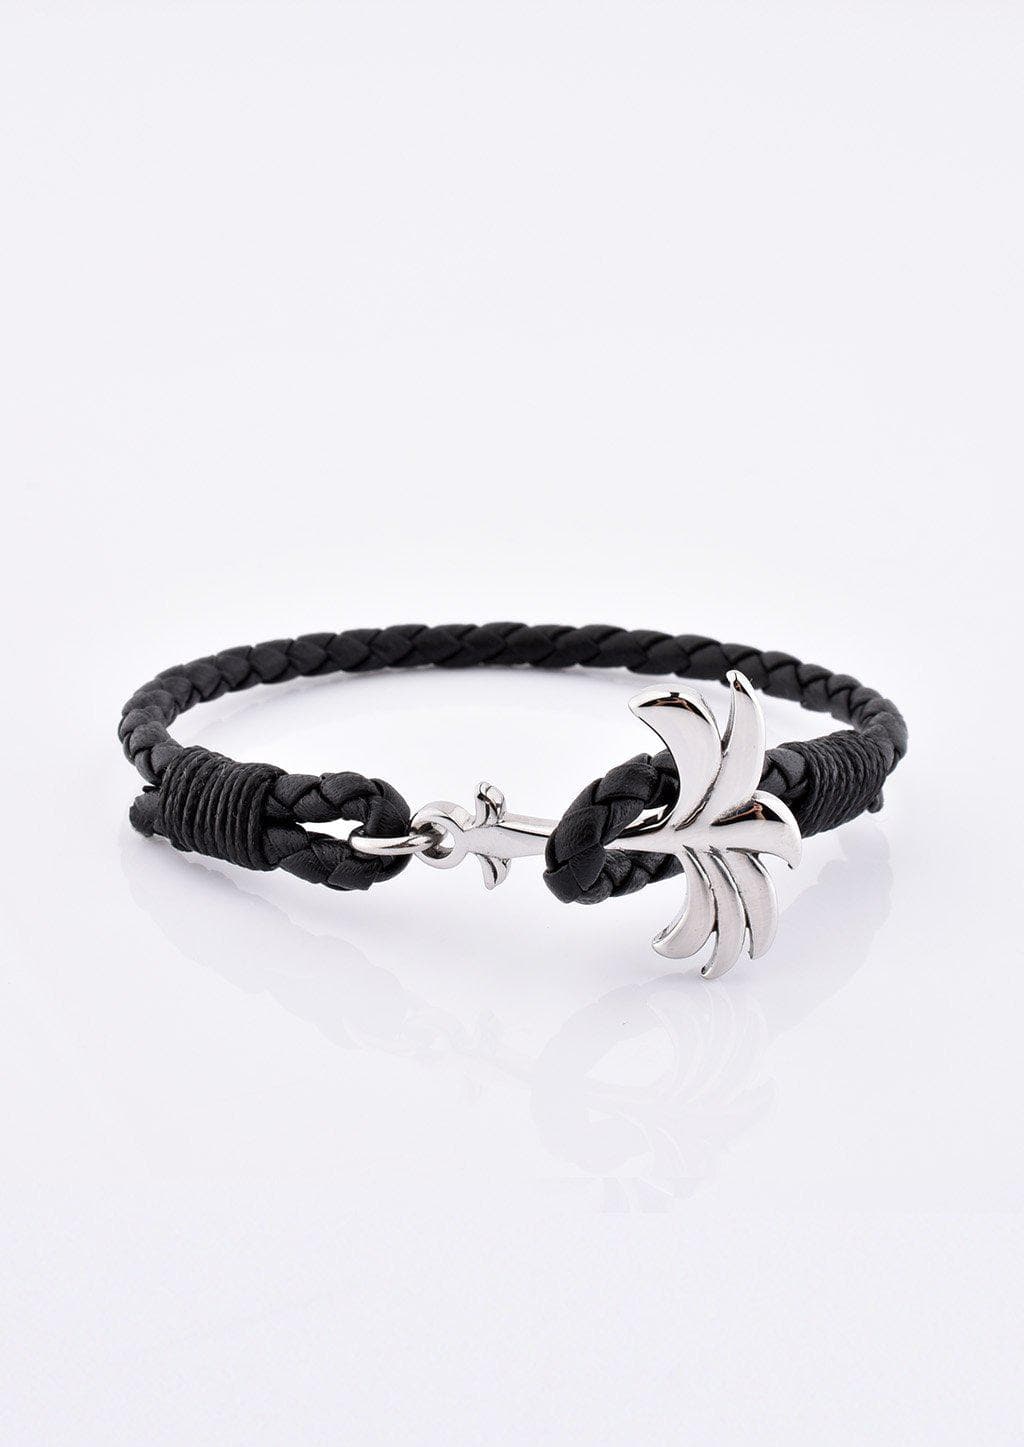 Starlight - Season two Palm anchor bracelet with black leather.